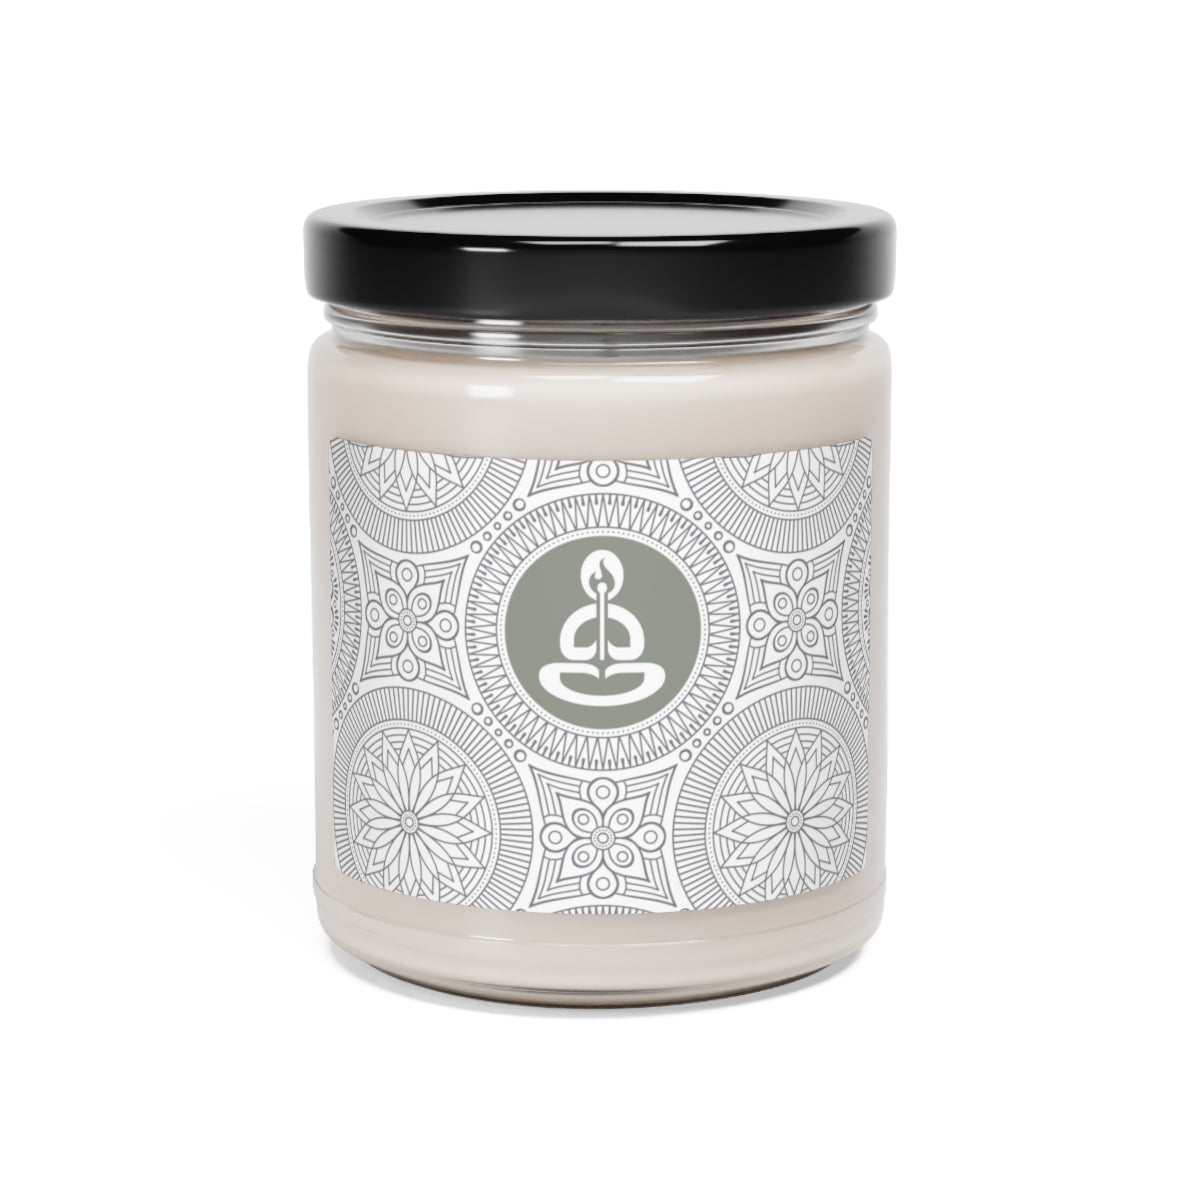 Spiritual Hooligan Scented Natural Soy Candle, 9oz